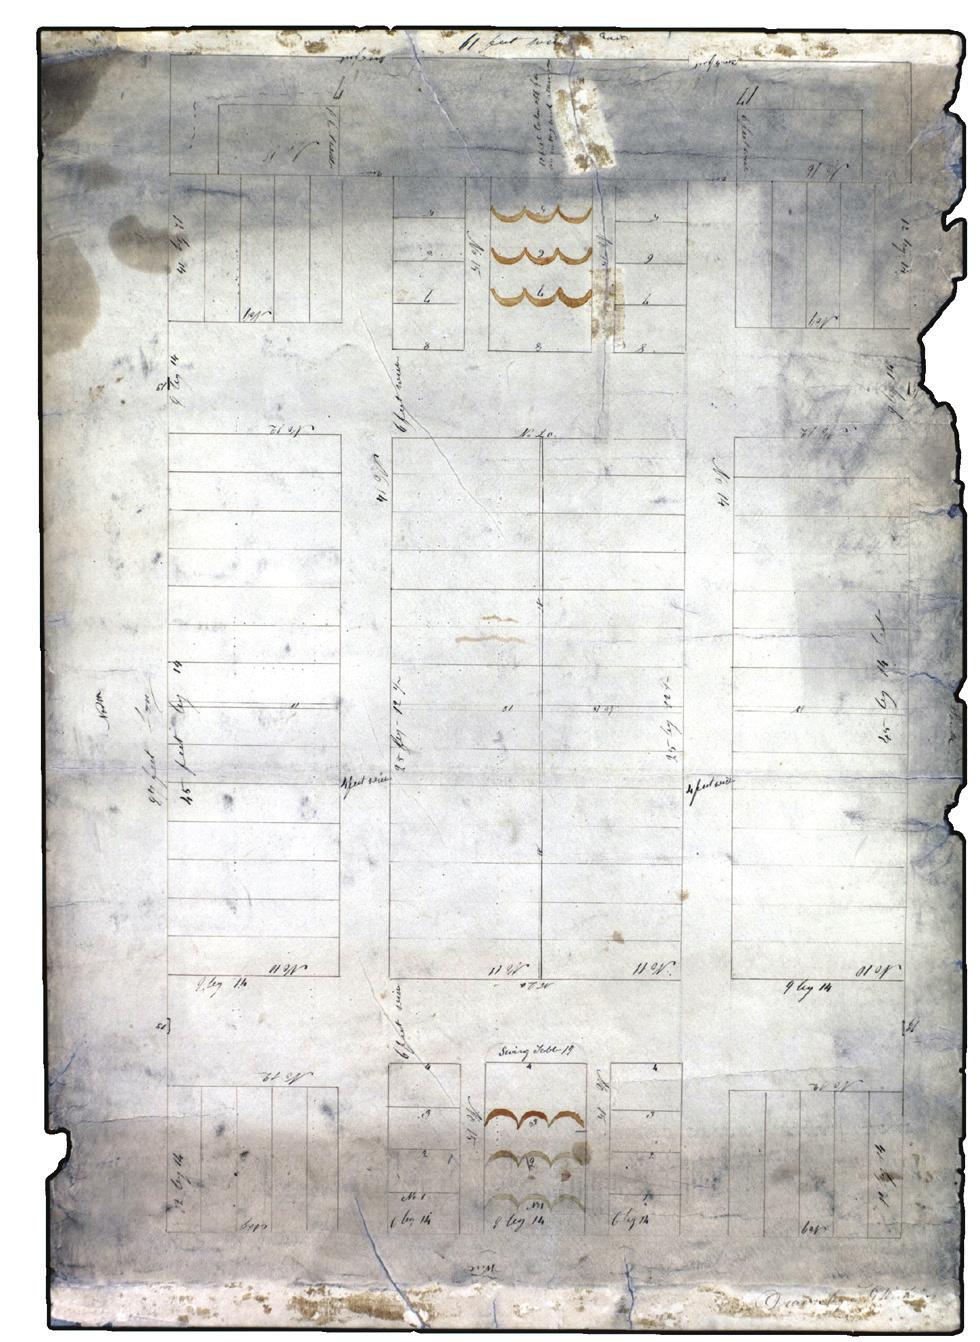 Frederick G. Williams. Plan of the House of the Lord, for the Independence temple, ca. August 1833.